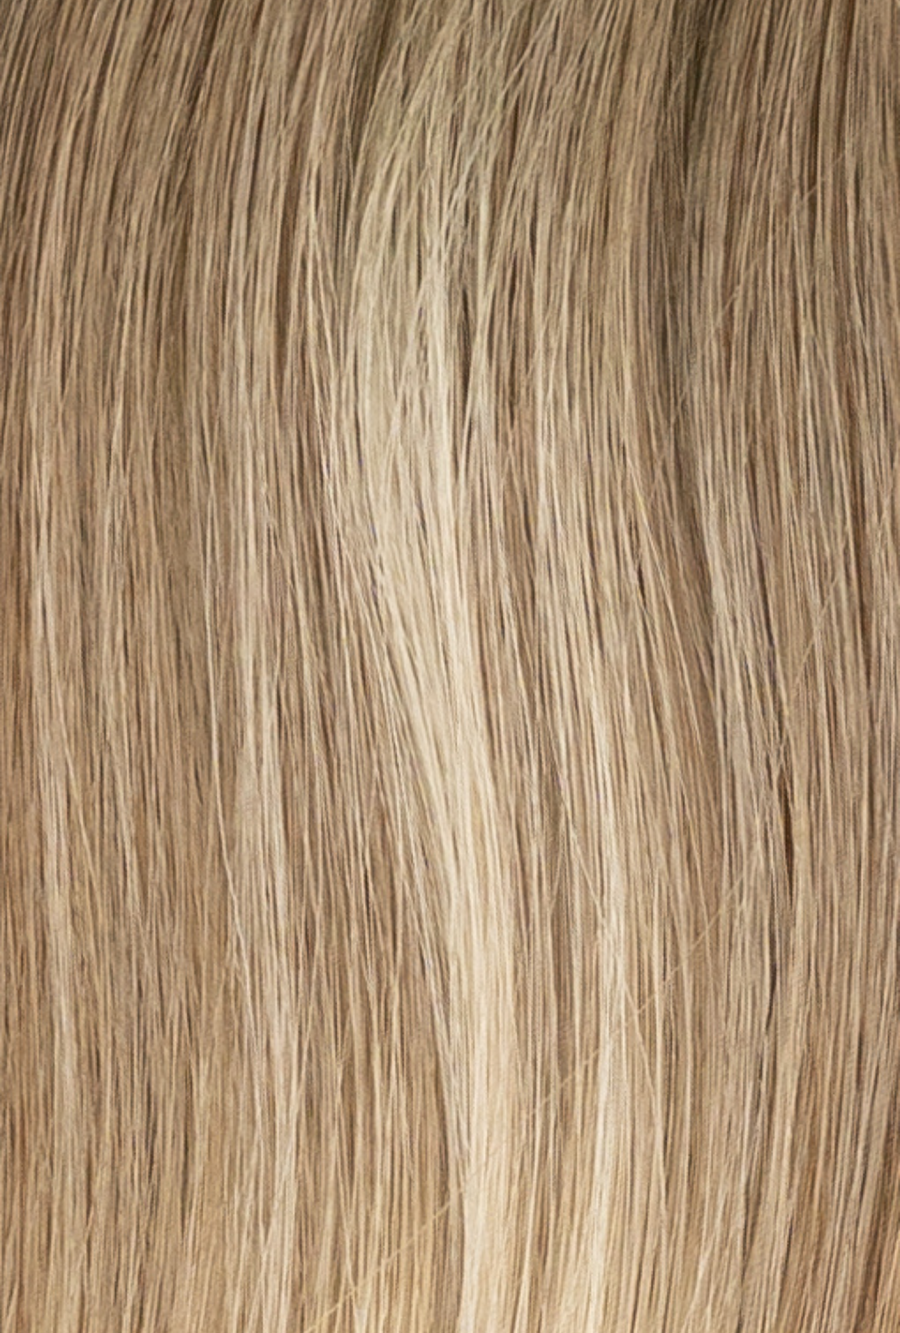 Beachwashed X Laced Hair Hand Tied Weft Extensions - Salt